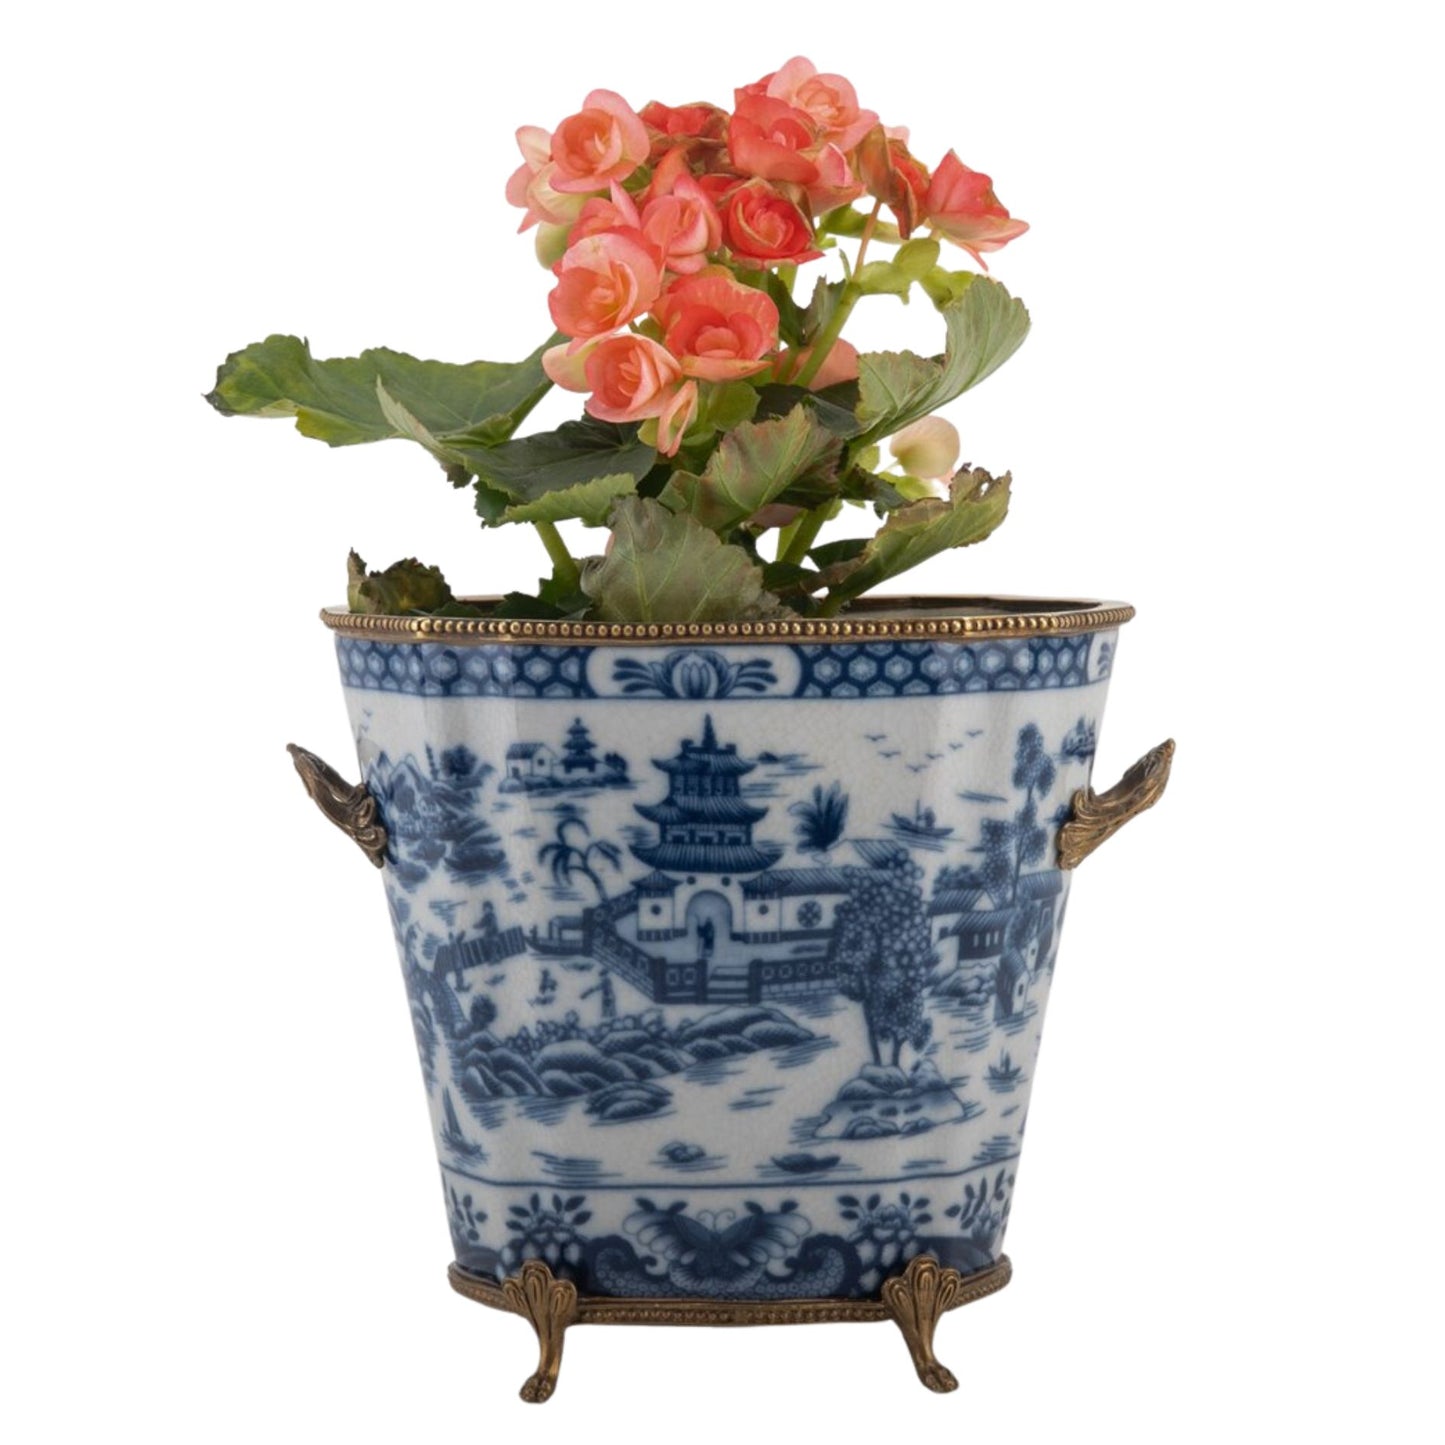 NEW - Blue & White Porcelain Planter W/ Bronze Footings & Details, 7.5" Tall